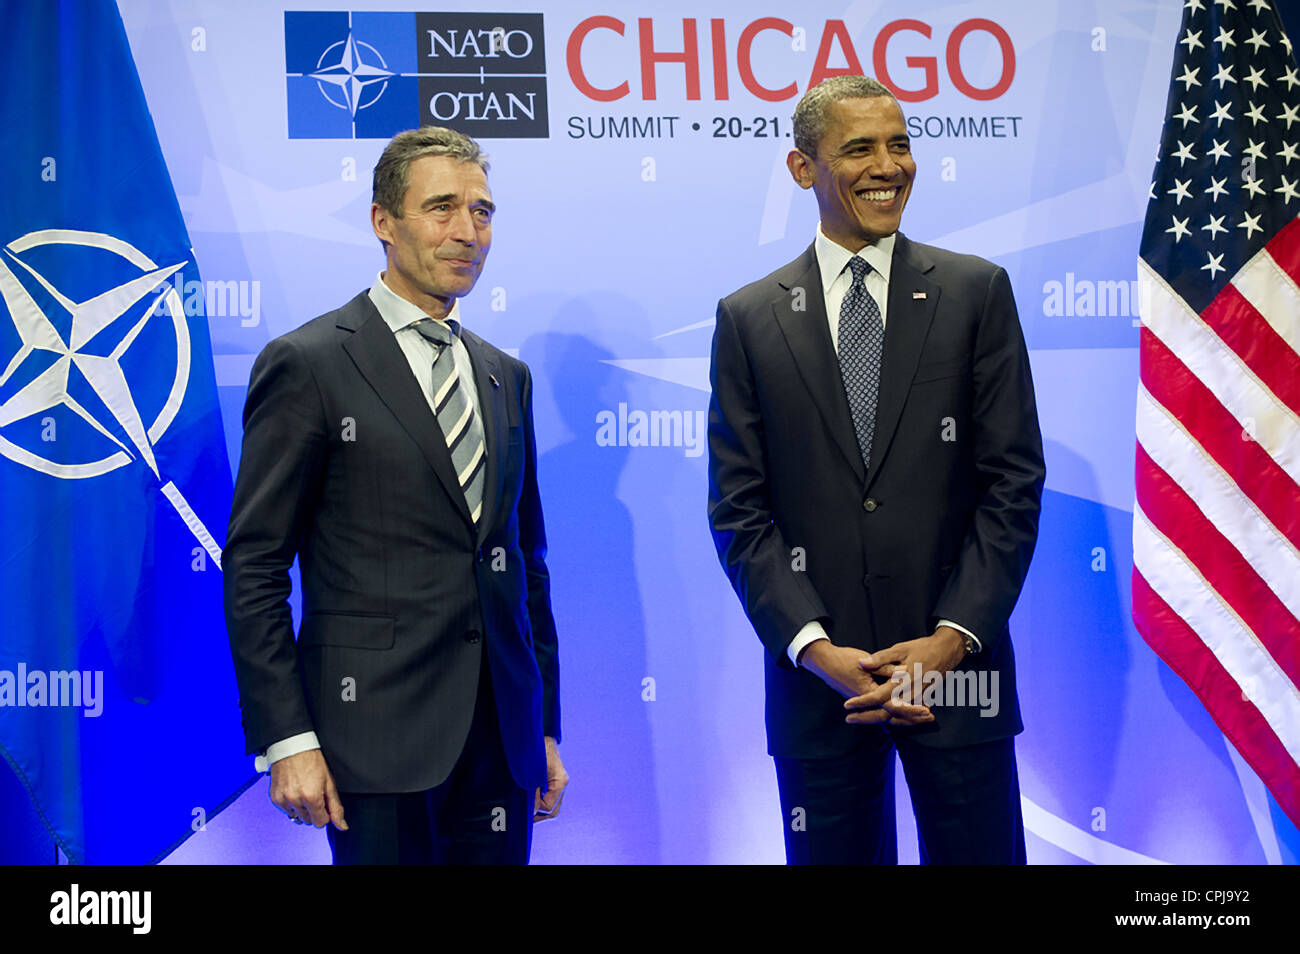 US President Barack Obama thanks NATO Secretary General Anders Fogh Rasmussen at the opening of the NATO Summit at the McCormick Place Convention Center May 20, 2012 in Chicago, Illinois. NATO leaders reached agreement on ending combat operations in Afghanistan. Stock Photo